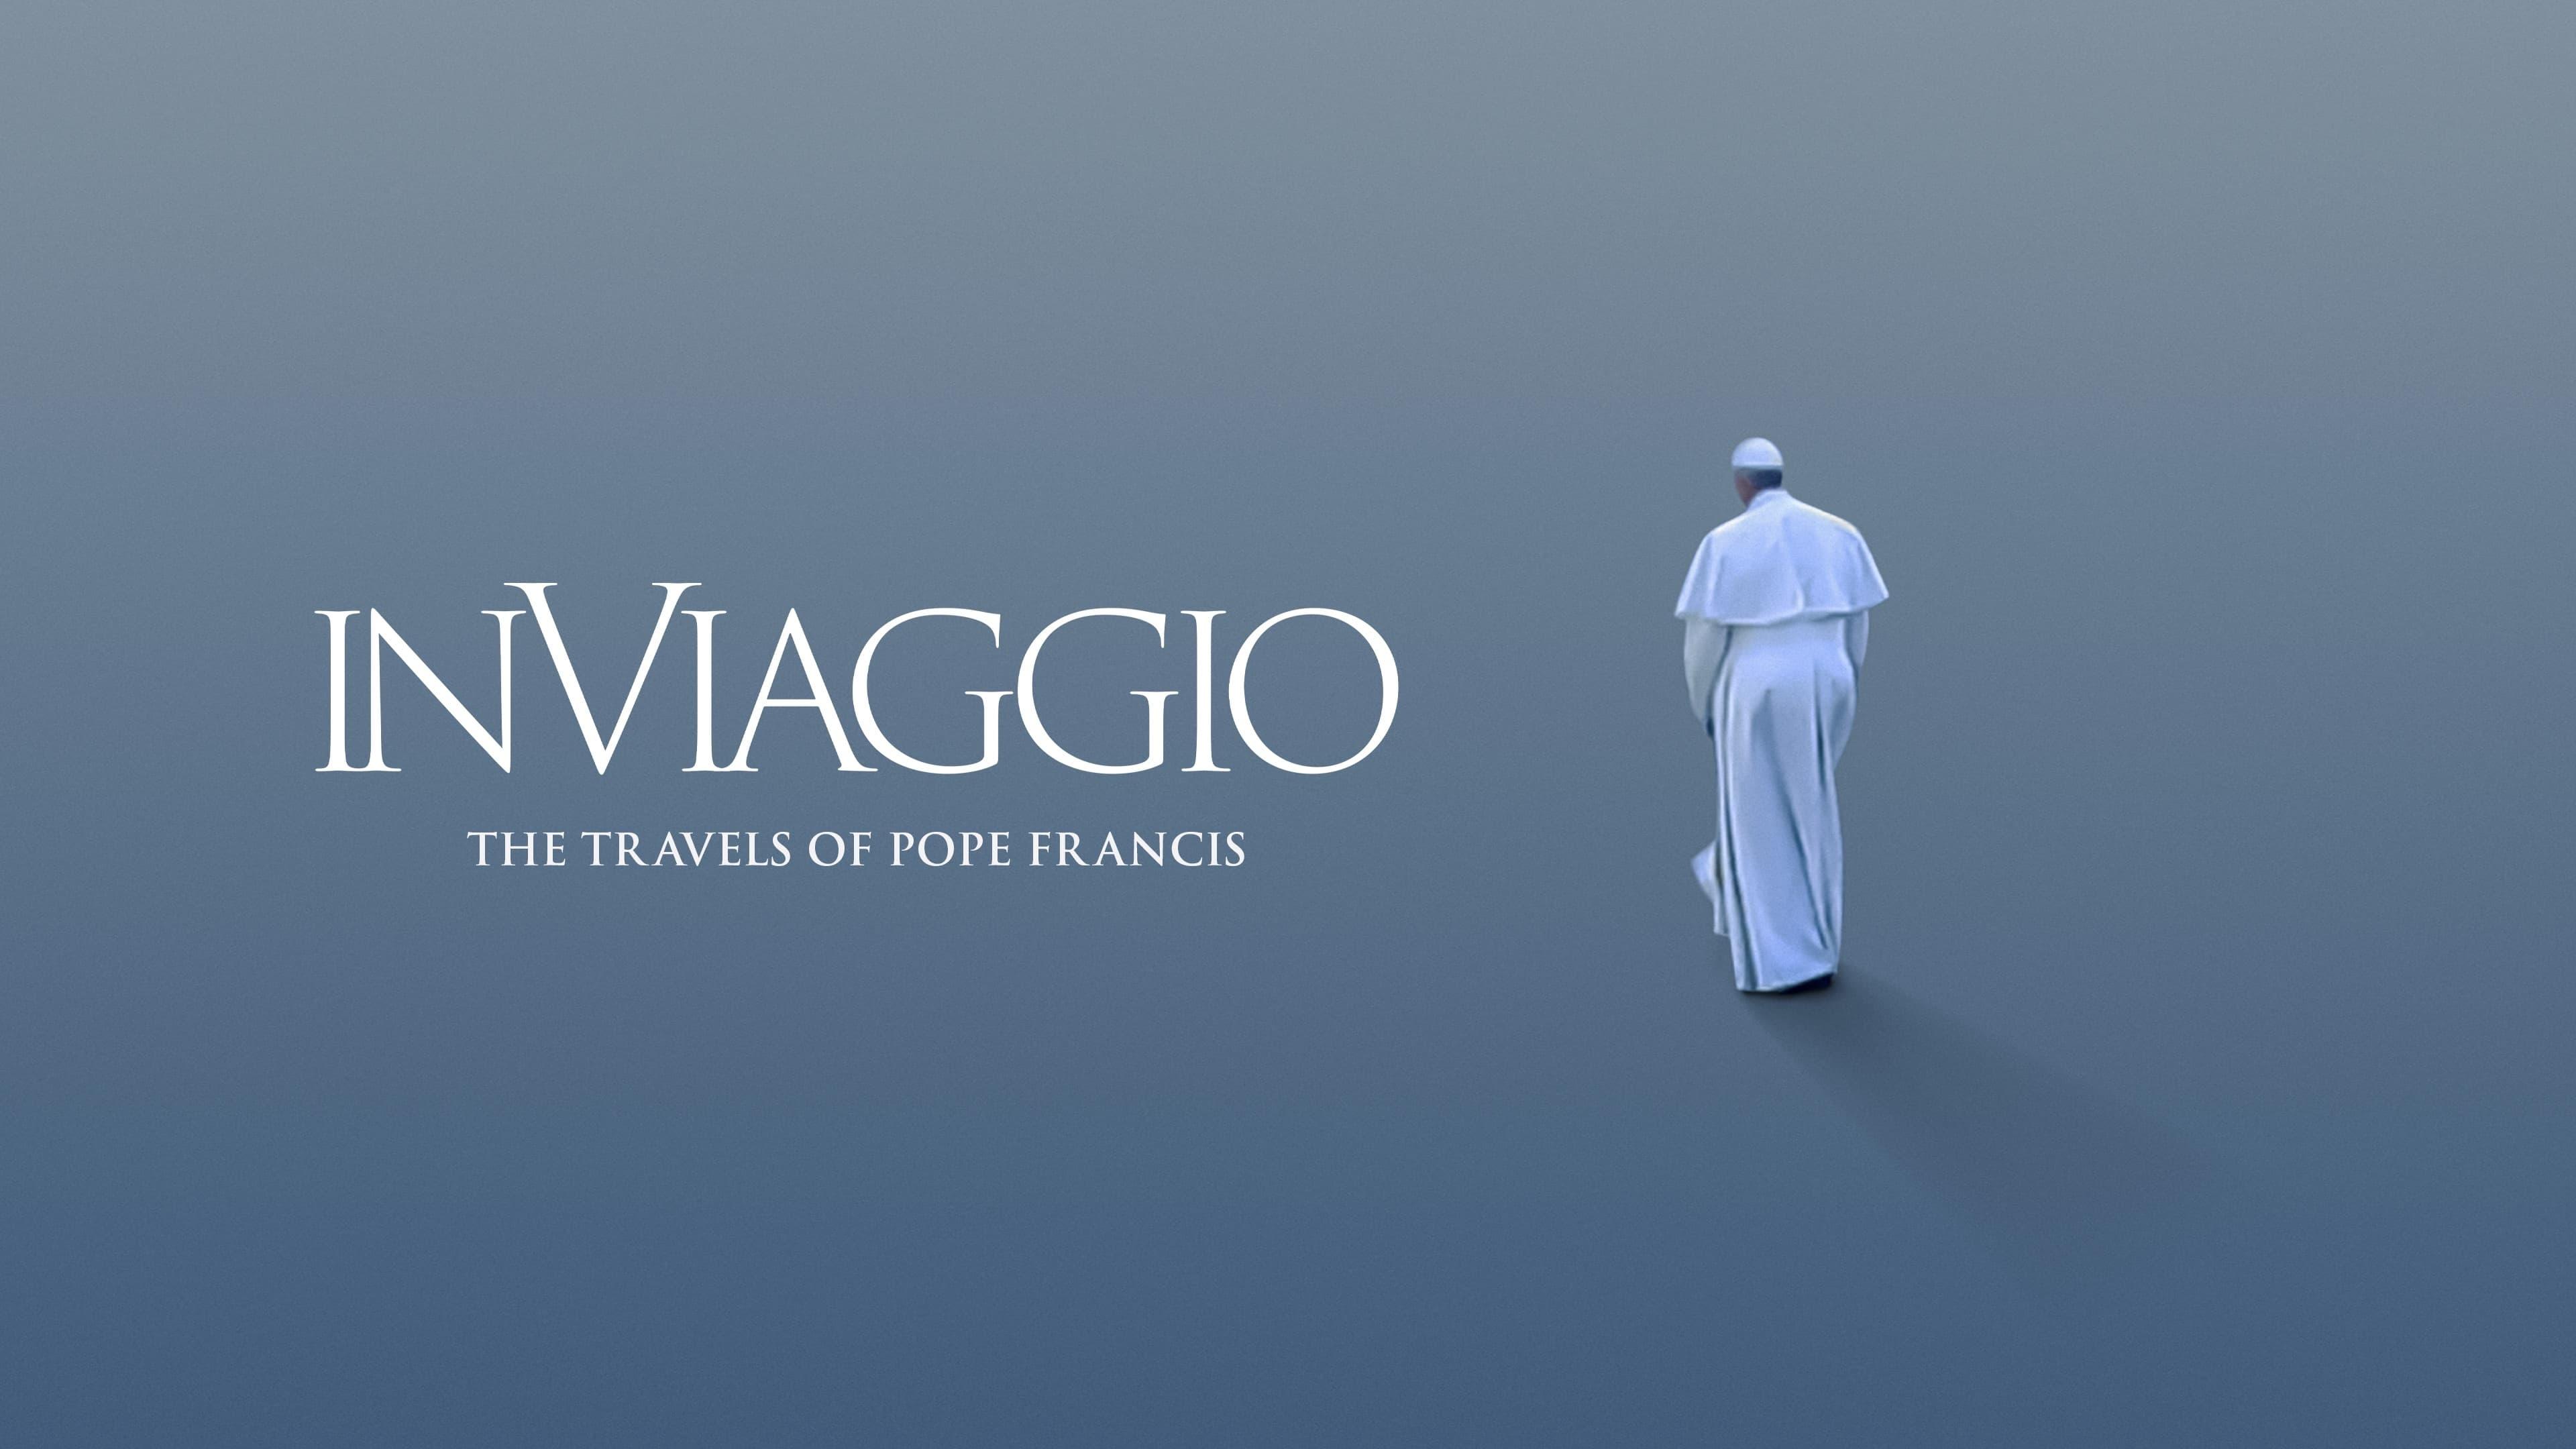 In Viaggio: The Travels of Pope Francis backdrop